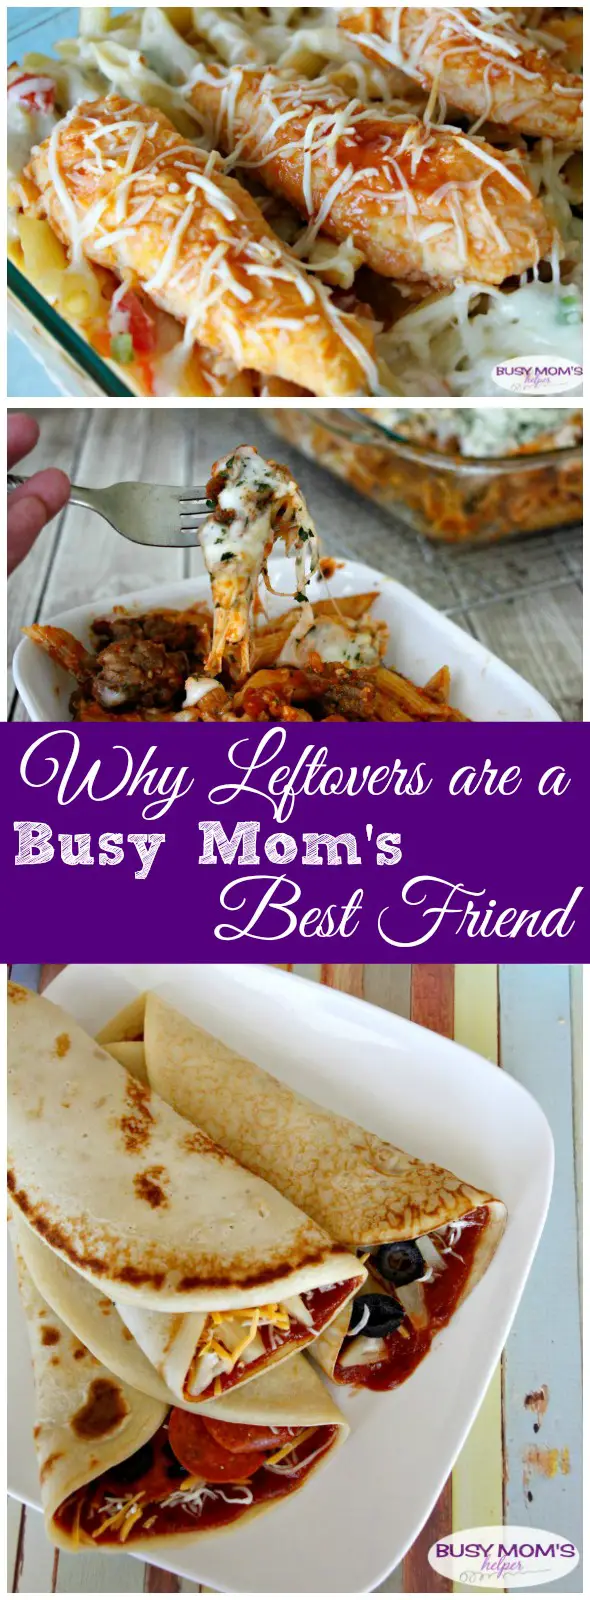 Why leftovers are a Busy Mom's Best Friend - plan leftover nights into your weekly menu or meal plan for saving money, time and making dinnertime easier!